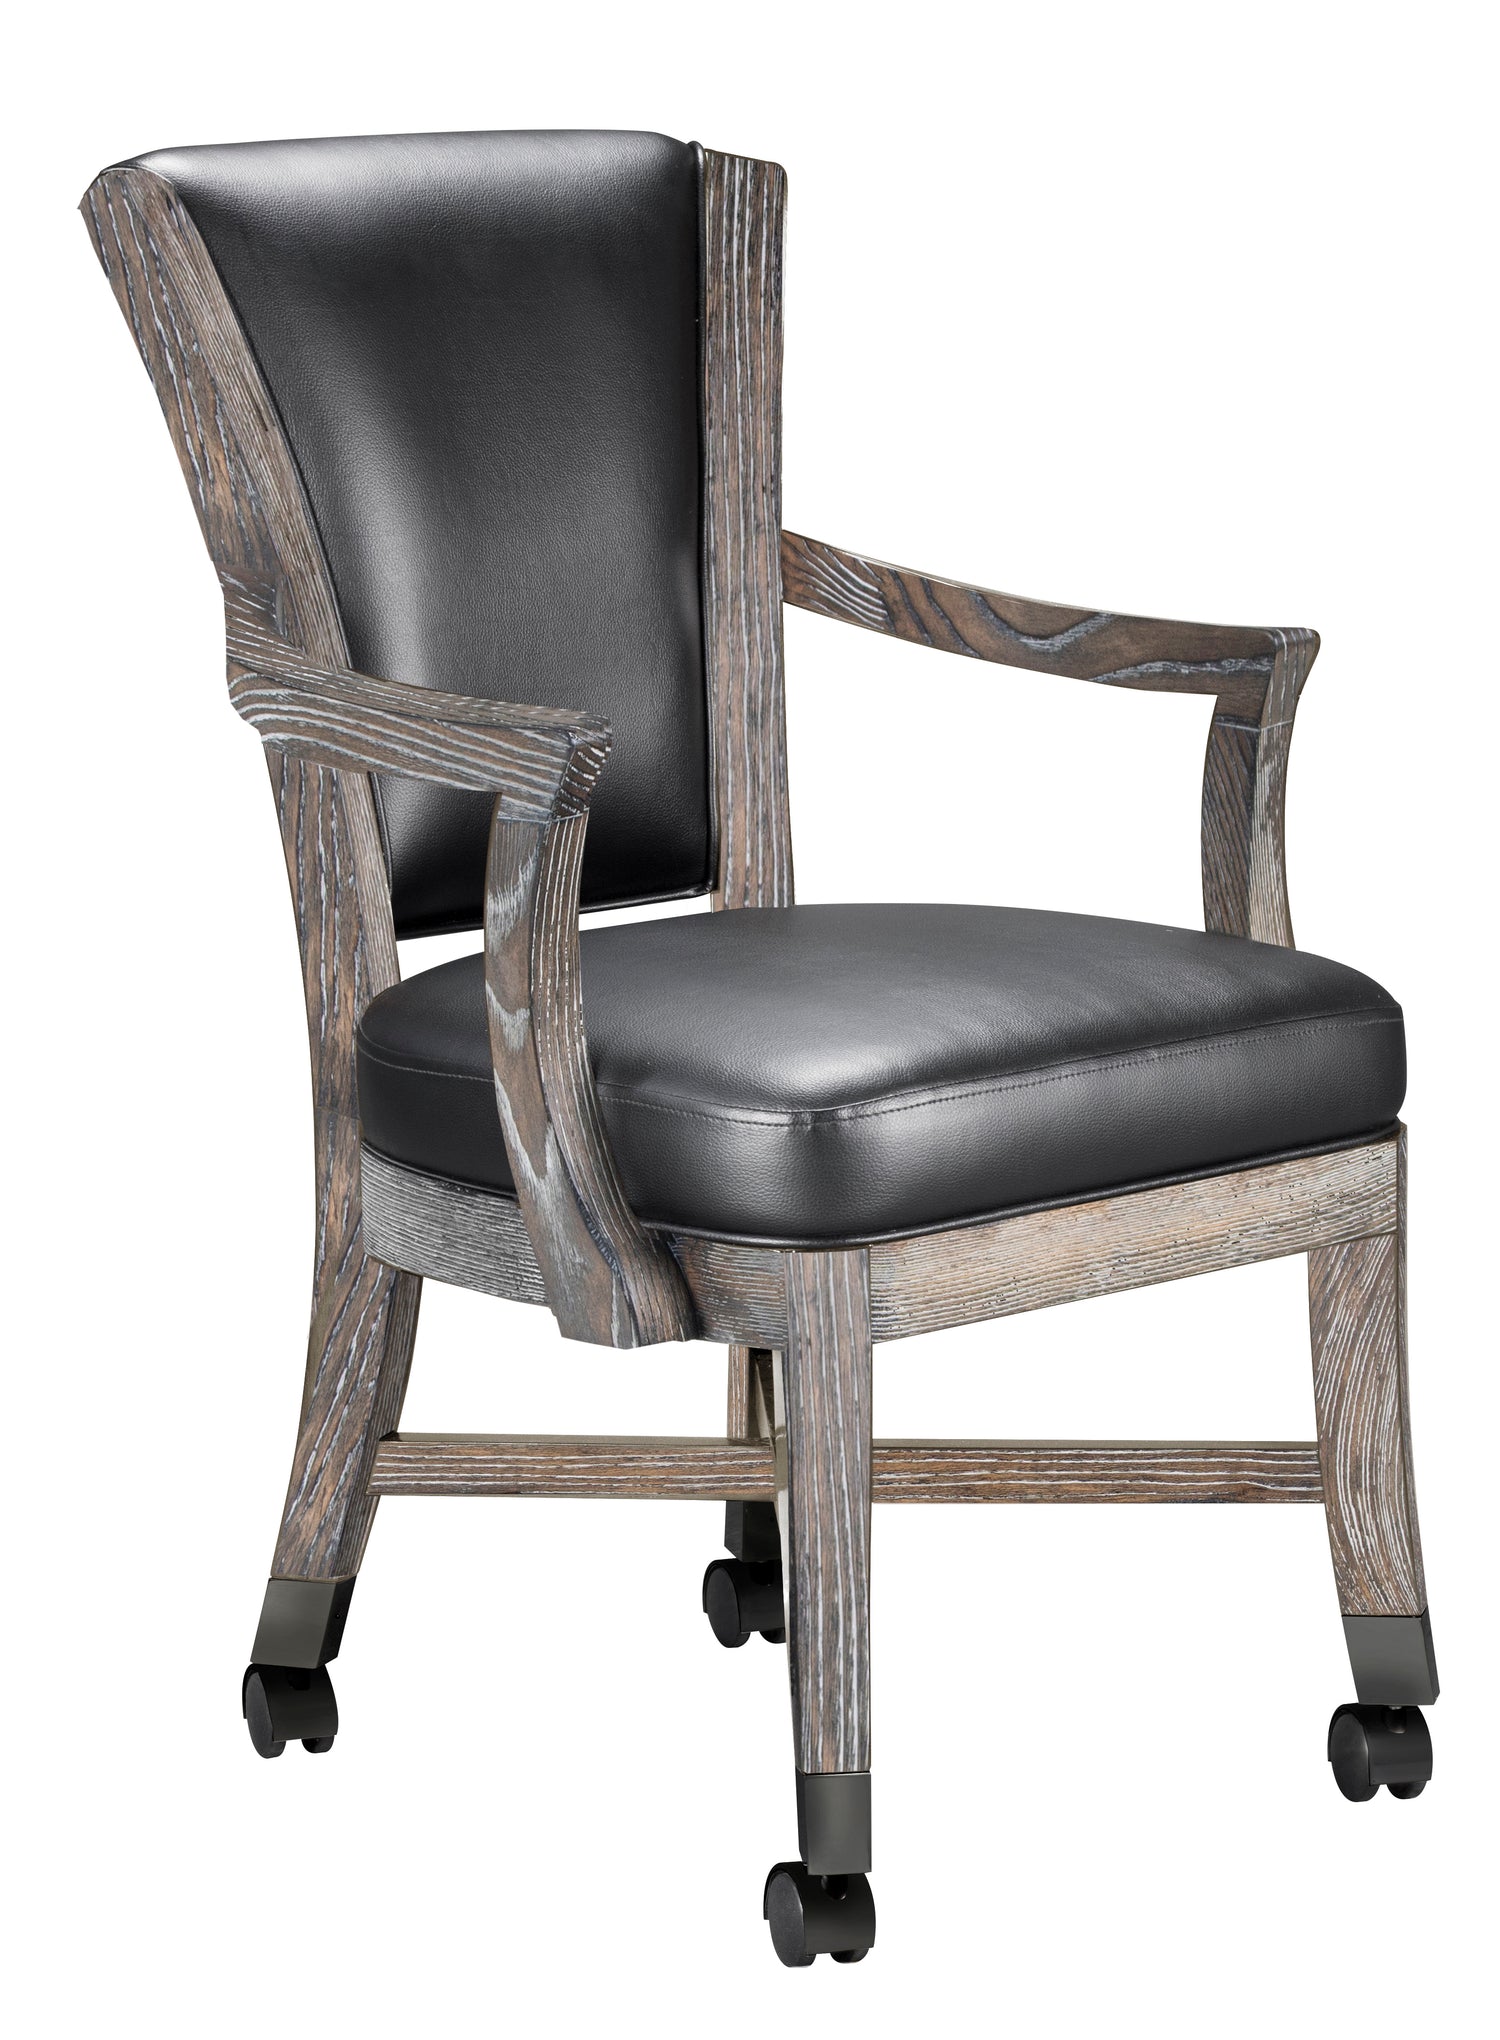 Legacy Billiards Elite Caster Game Chair in Smoke Finish